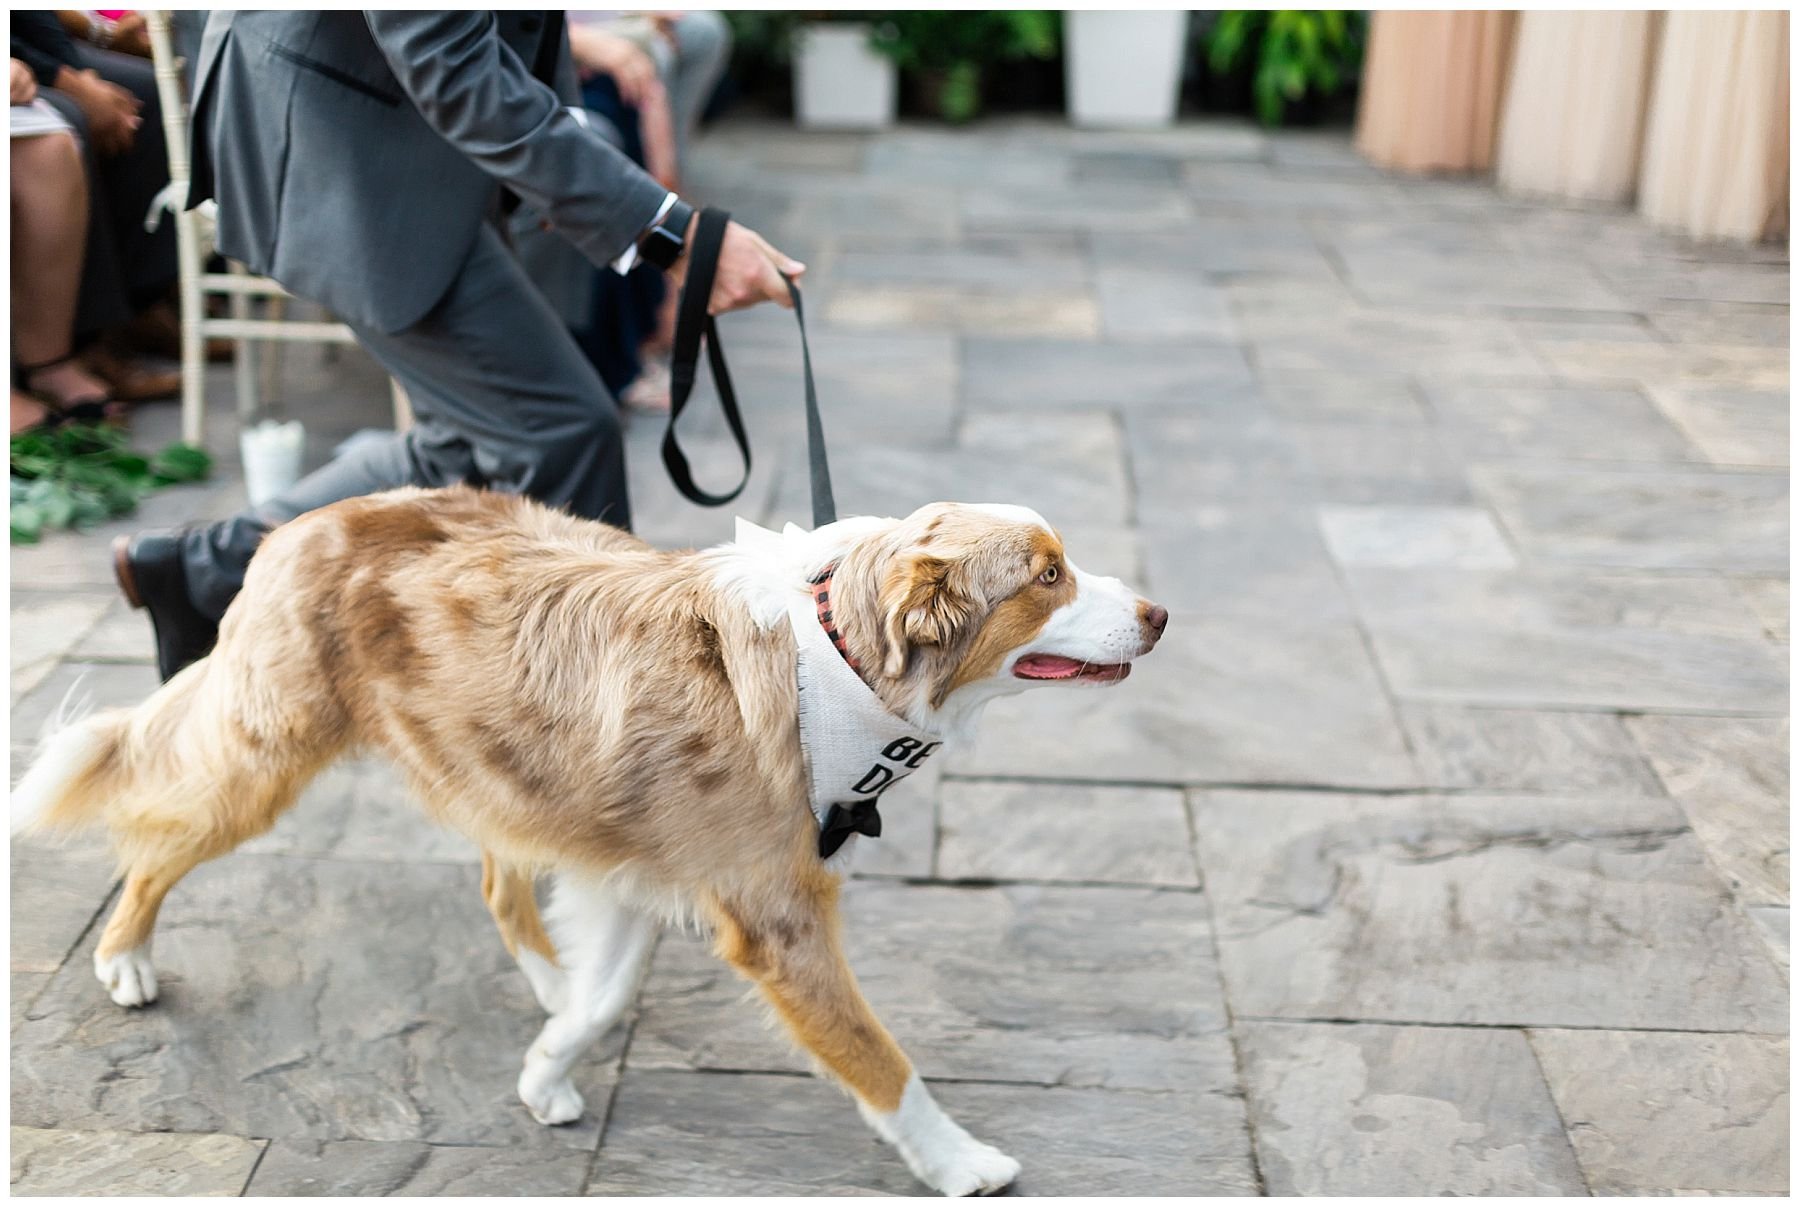 The bride and groom's dog walking down the aisle